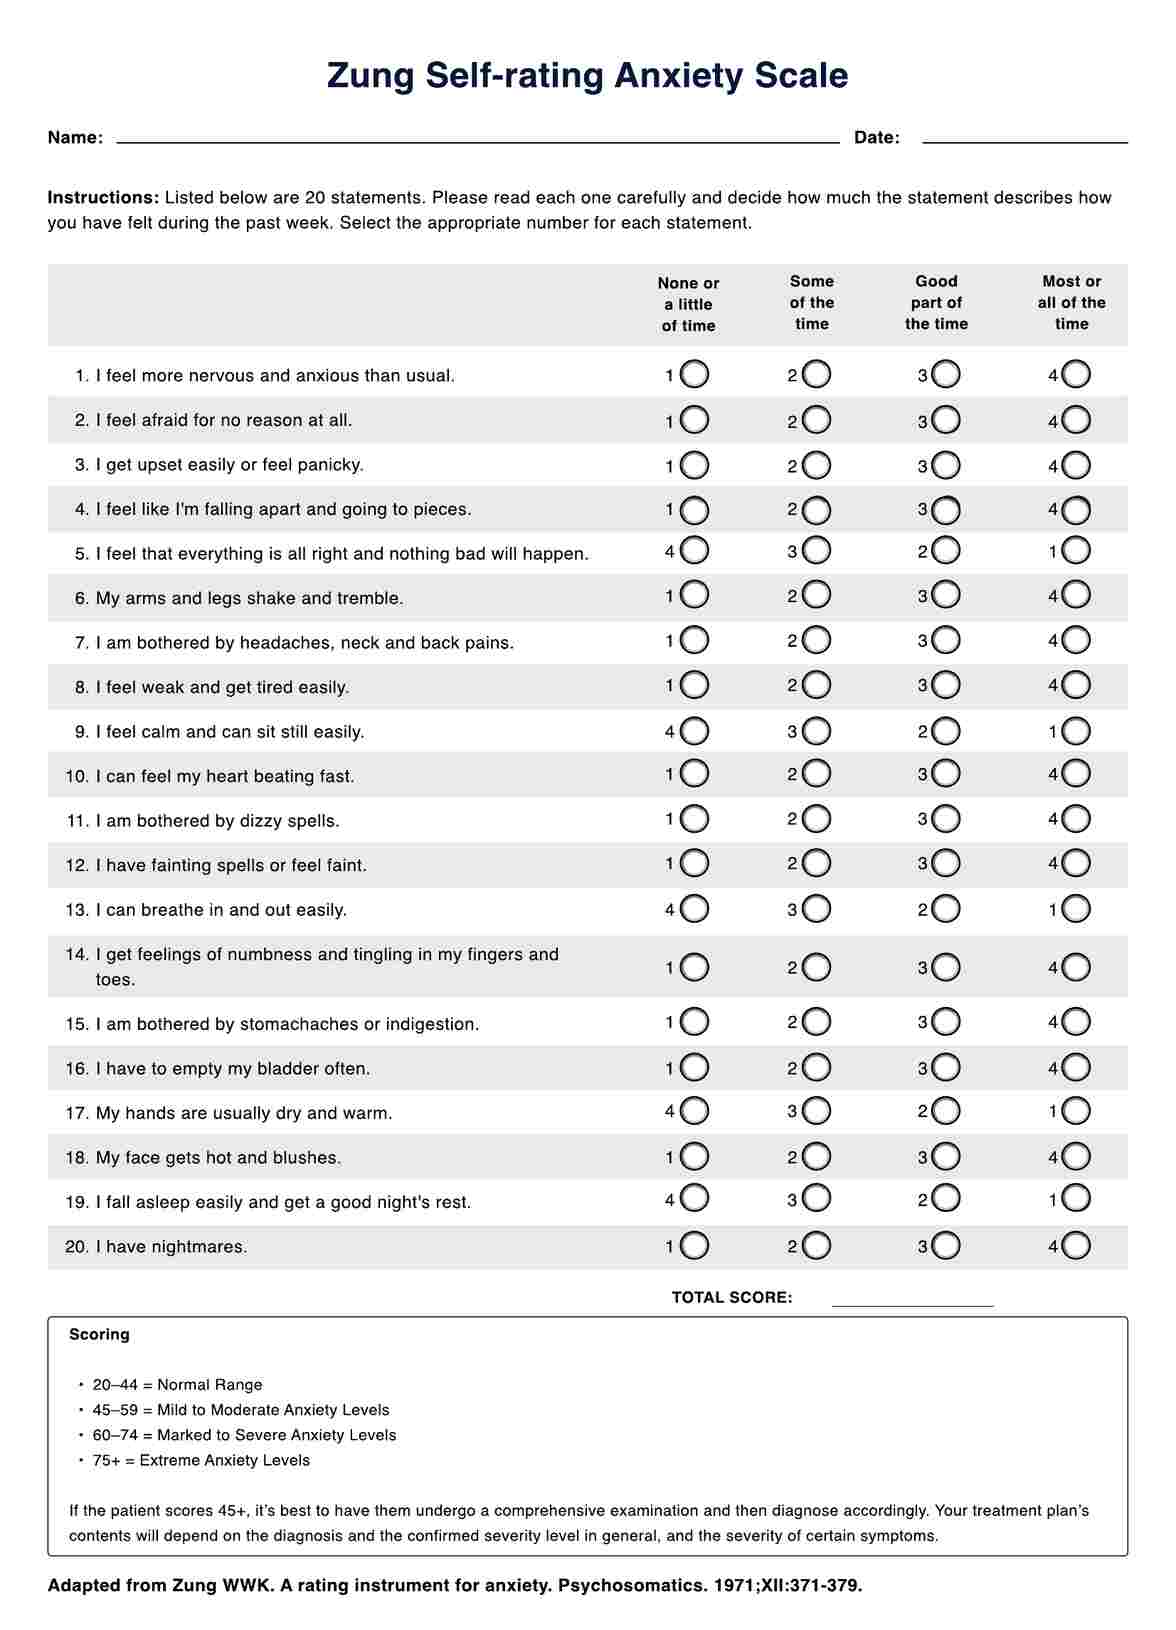 Zung Self-rating Anxiety Scale PDF Example